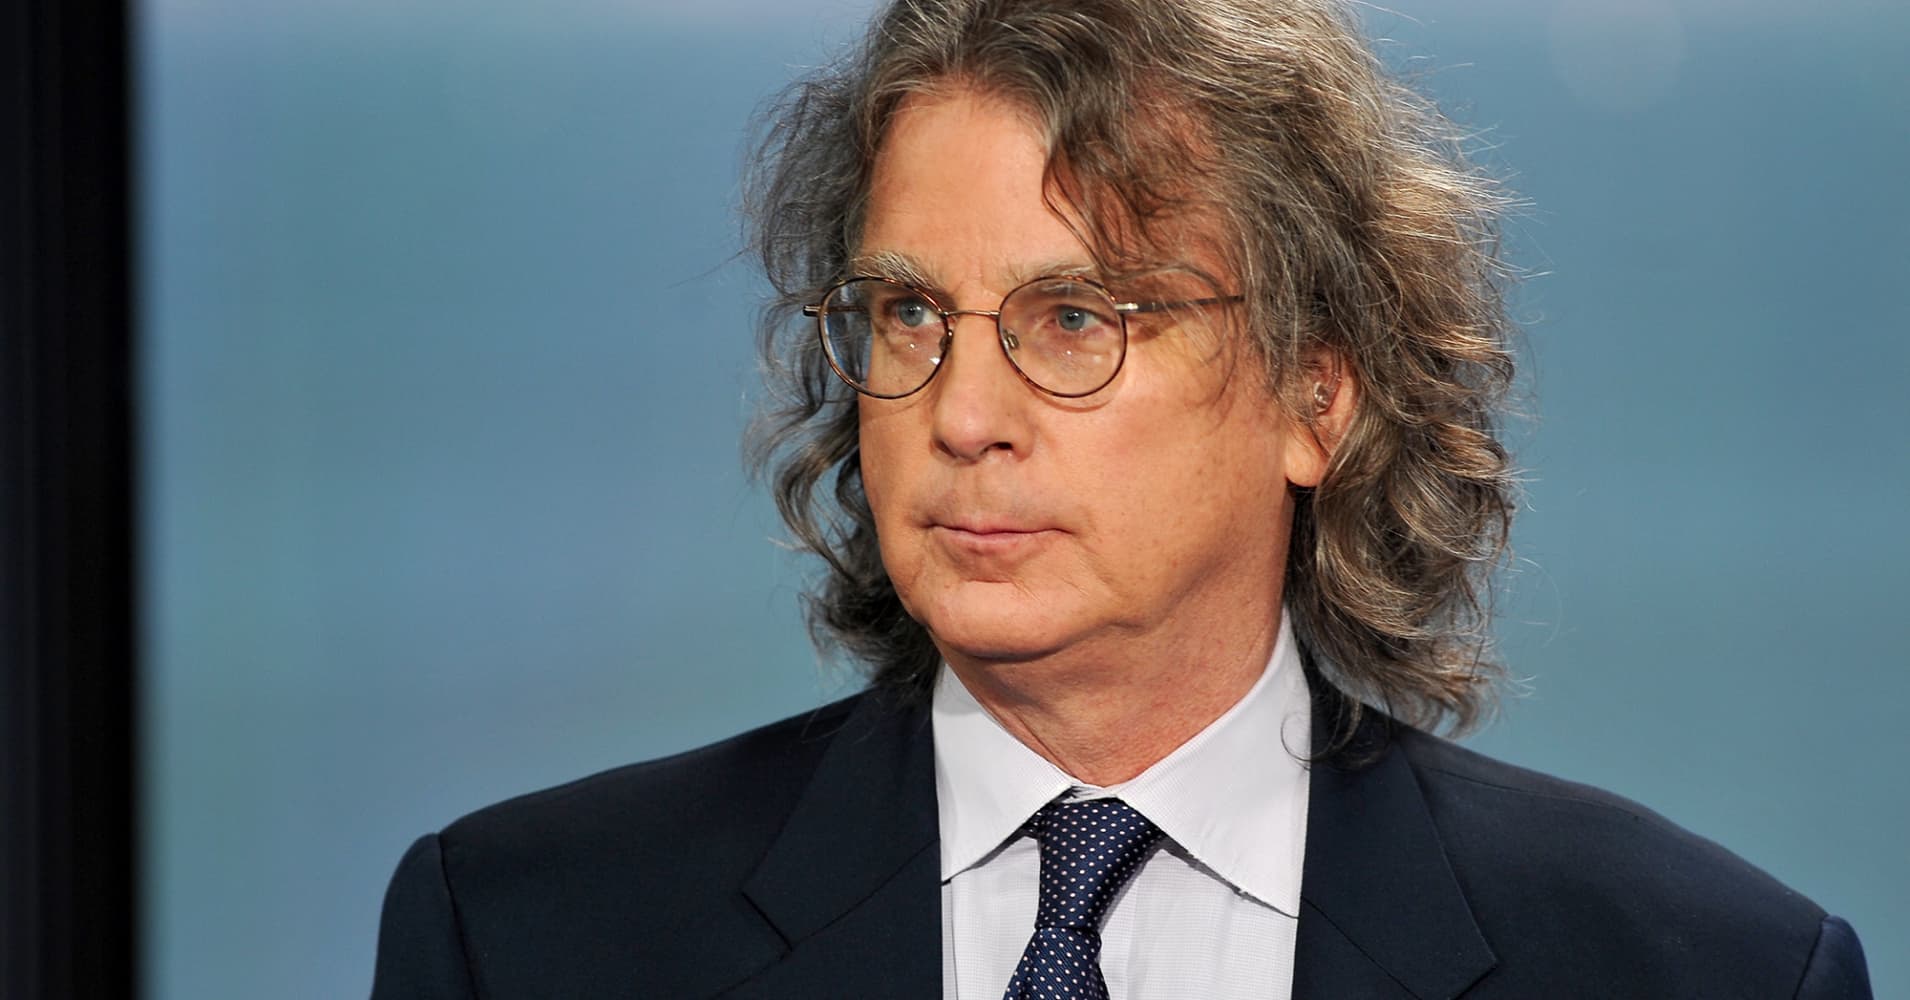 Facebook and Google 'get paid best when people are emotional,' says investor Roger McNamee